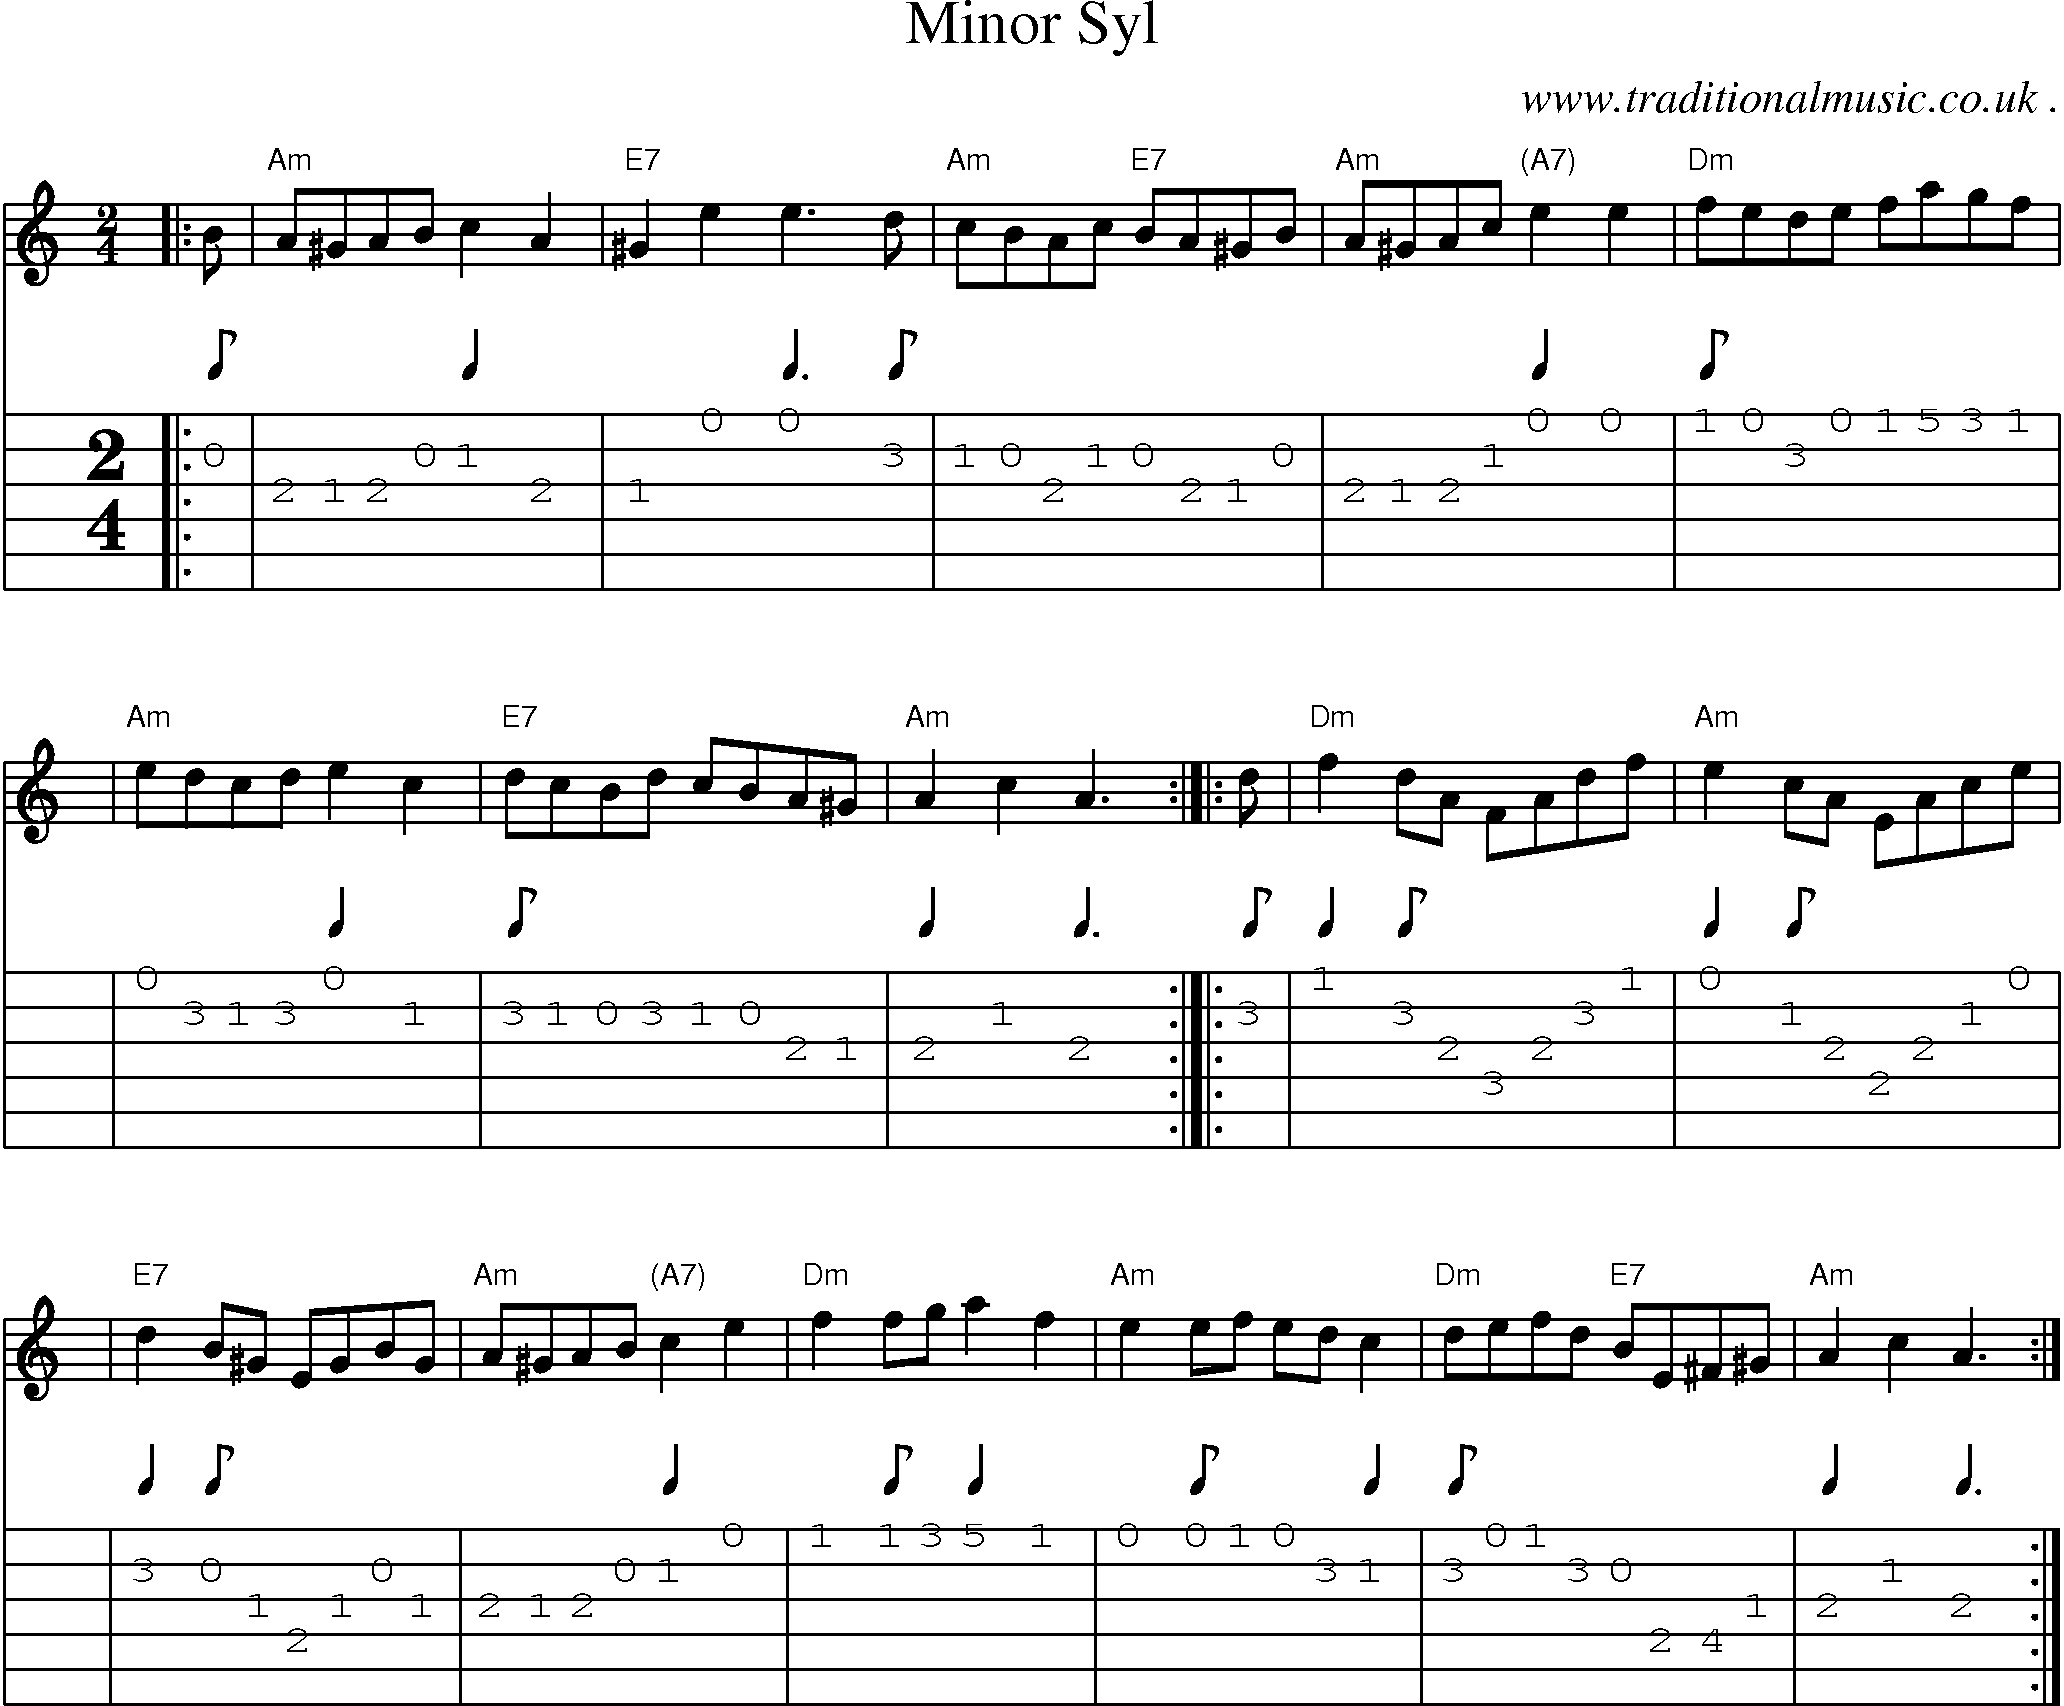 Sheet-music  score, Chords and Guitar Tabs for Minor Syl